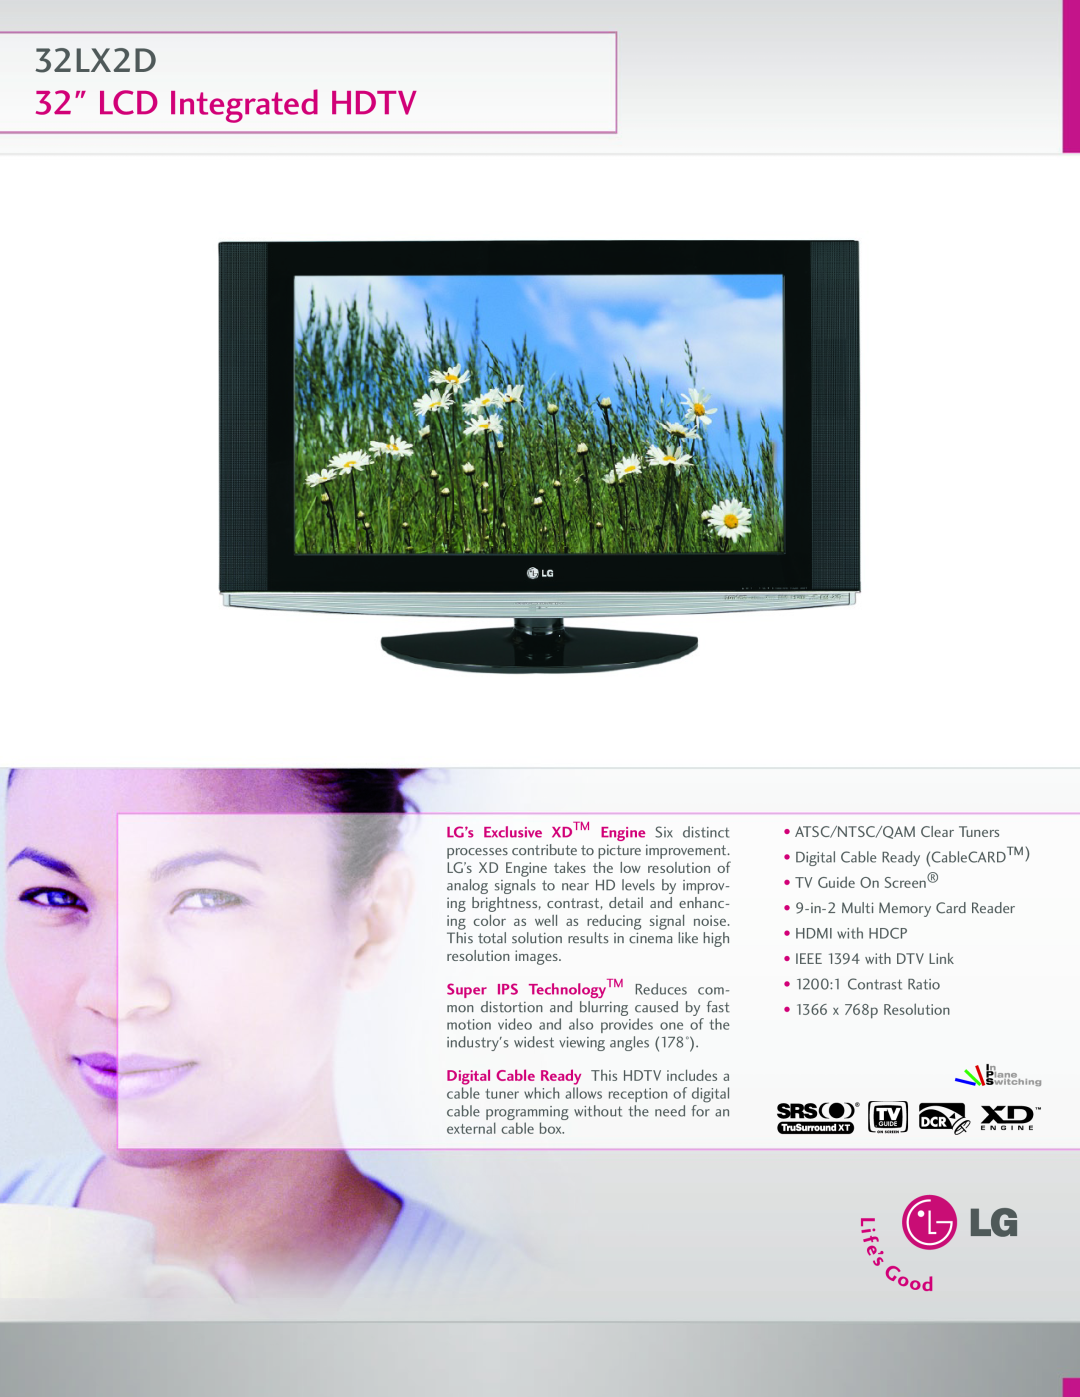 LG Electronics 32LX2D manual LCD Integrated HDTV, ATSC/NTSC/QAM Clear Tuners Digital Cable Ready CableCARD 